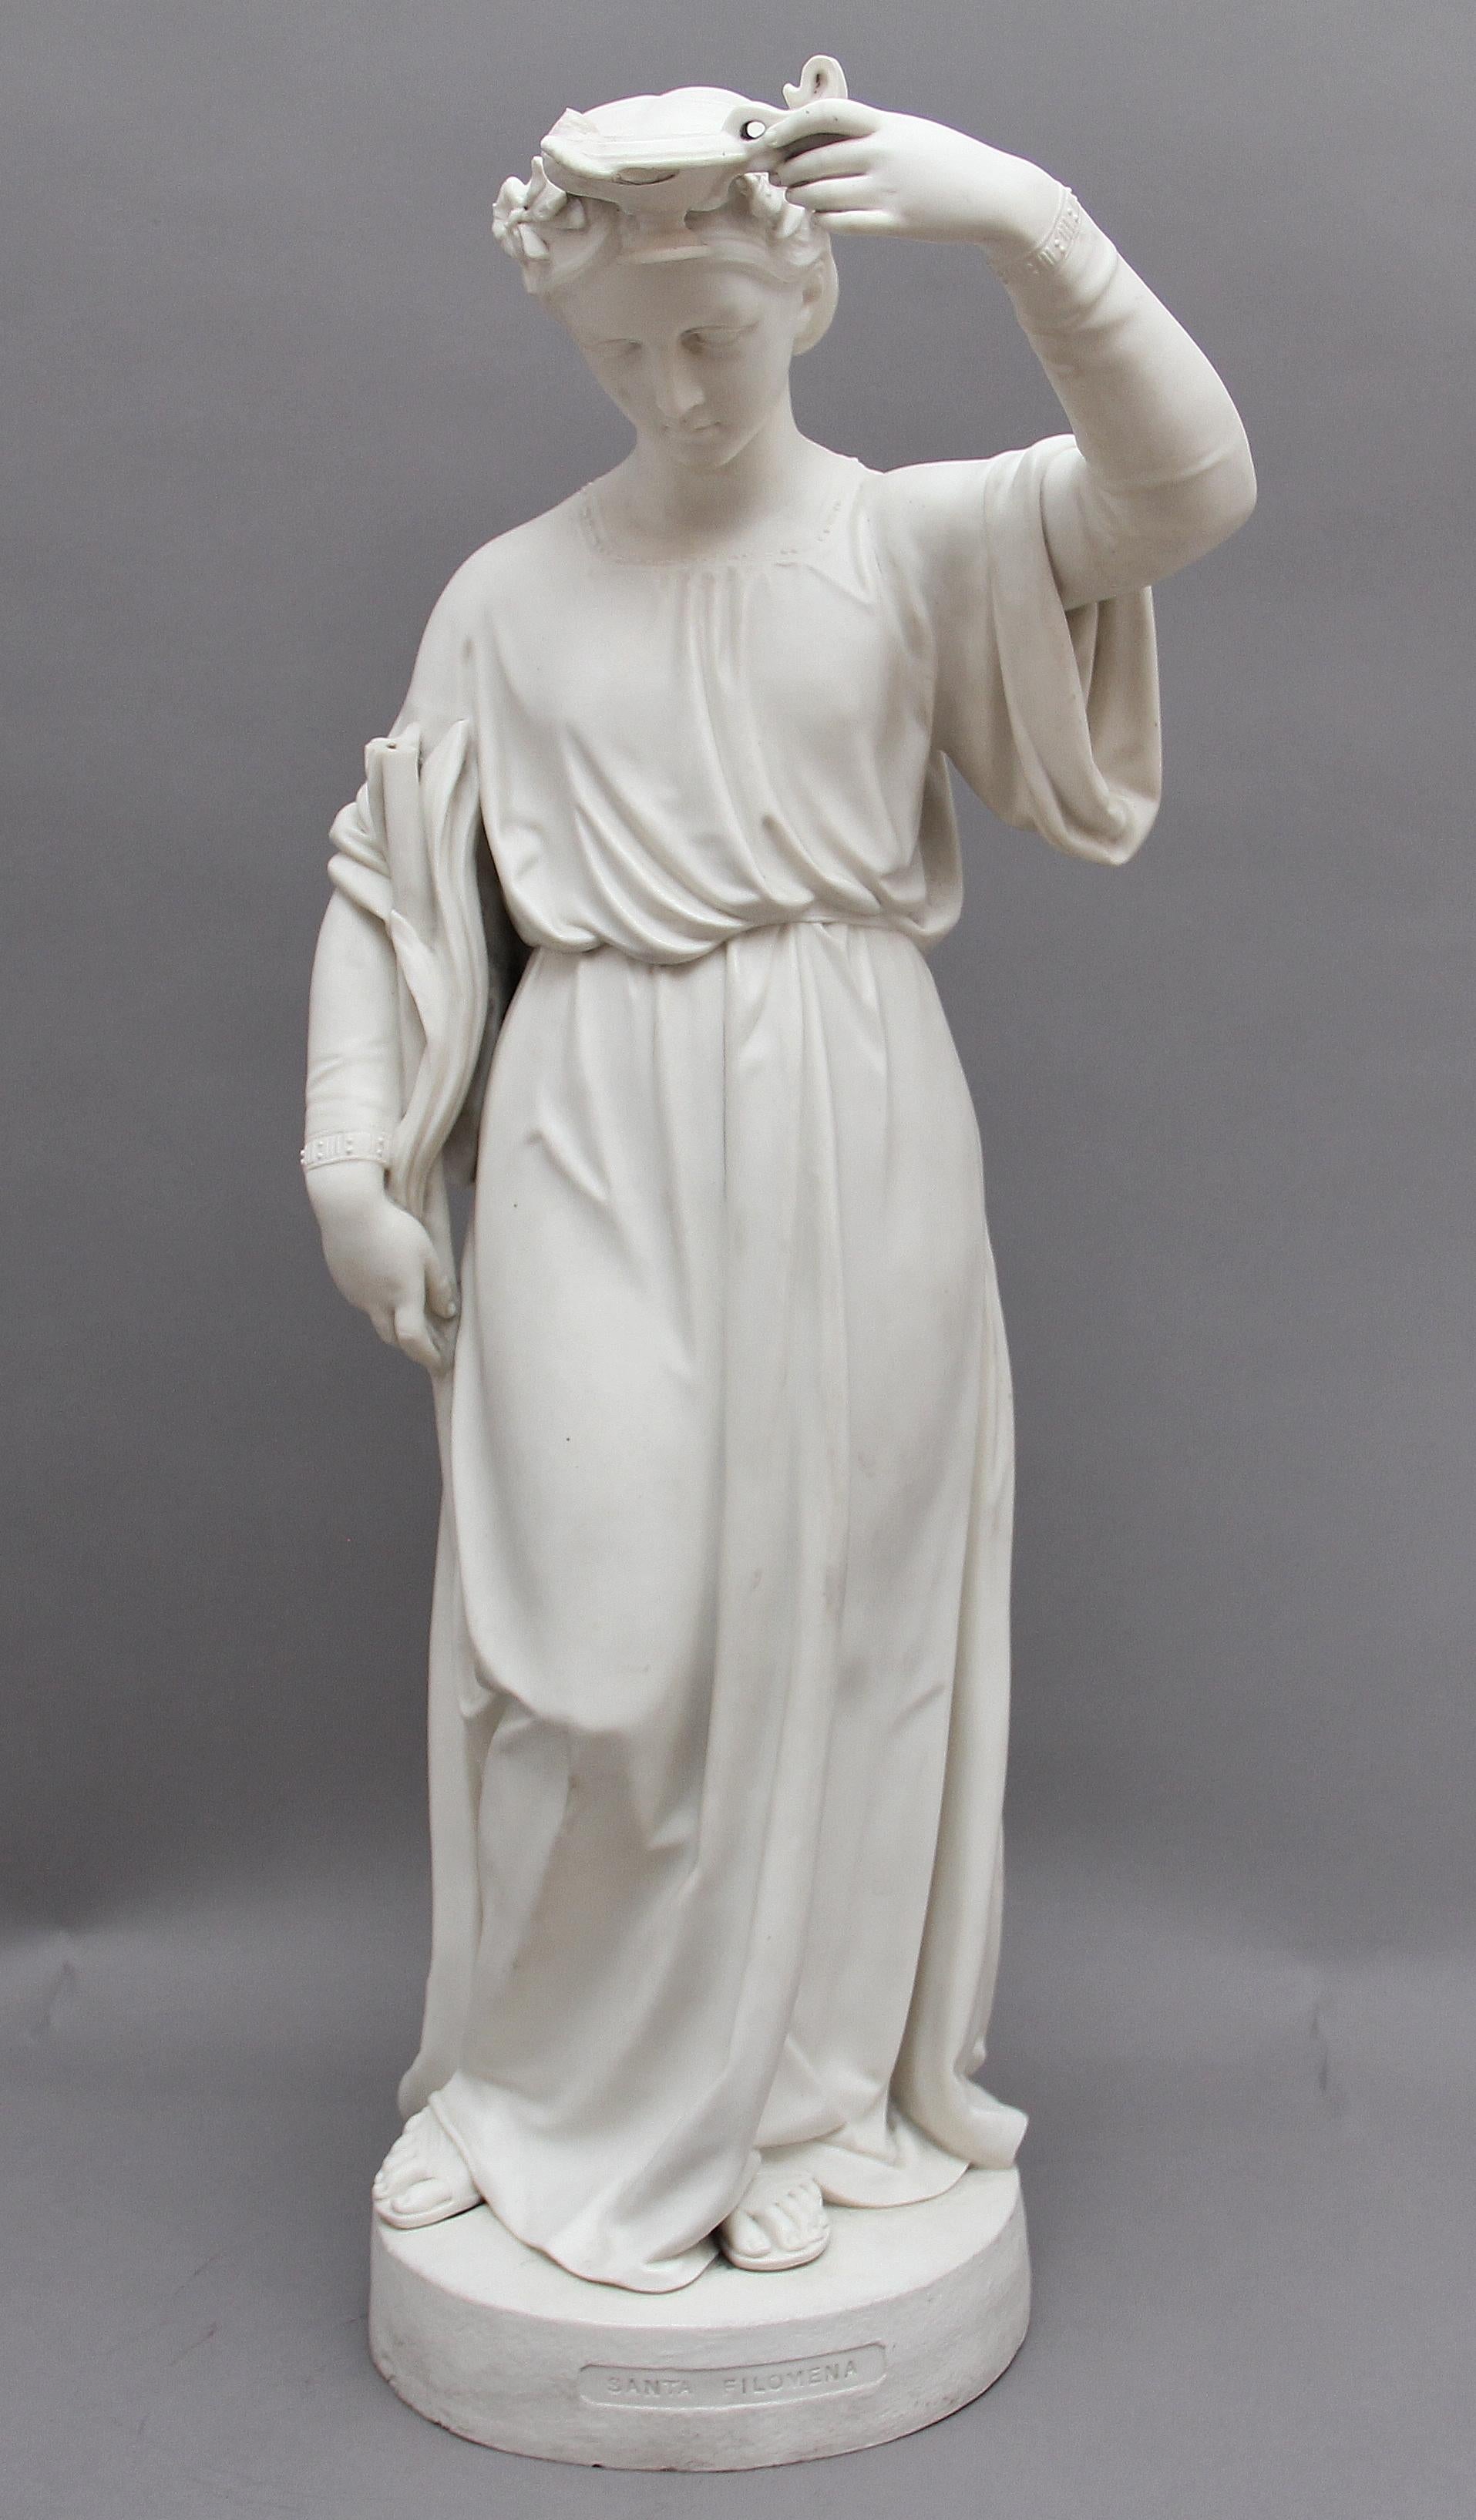 A lovely quality 19th century parian figure of the lady with the lamp which is associated with Florence Nightingale, here she is standing on a base holding a lamp up in one hand and holding what looks like to be a staff. The base is marked “Santa